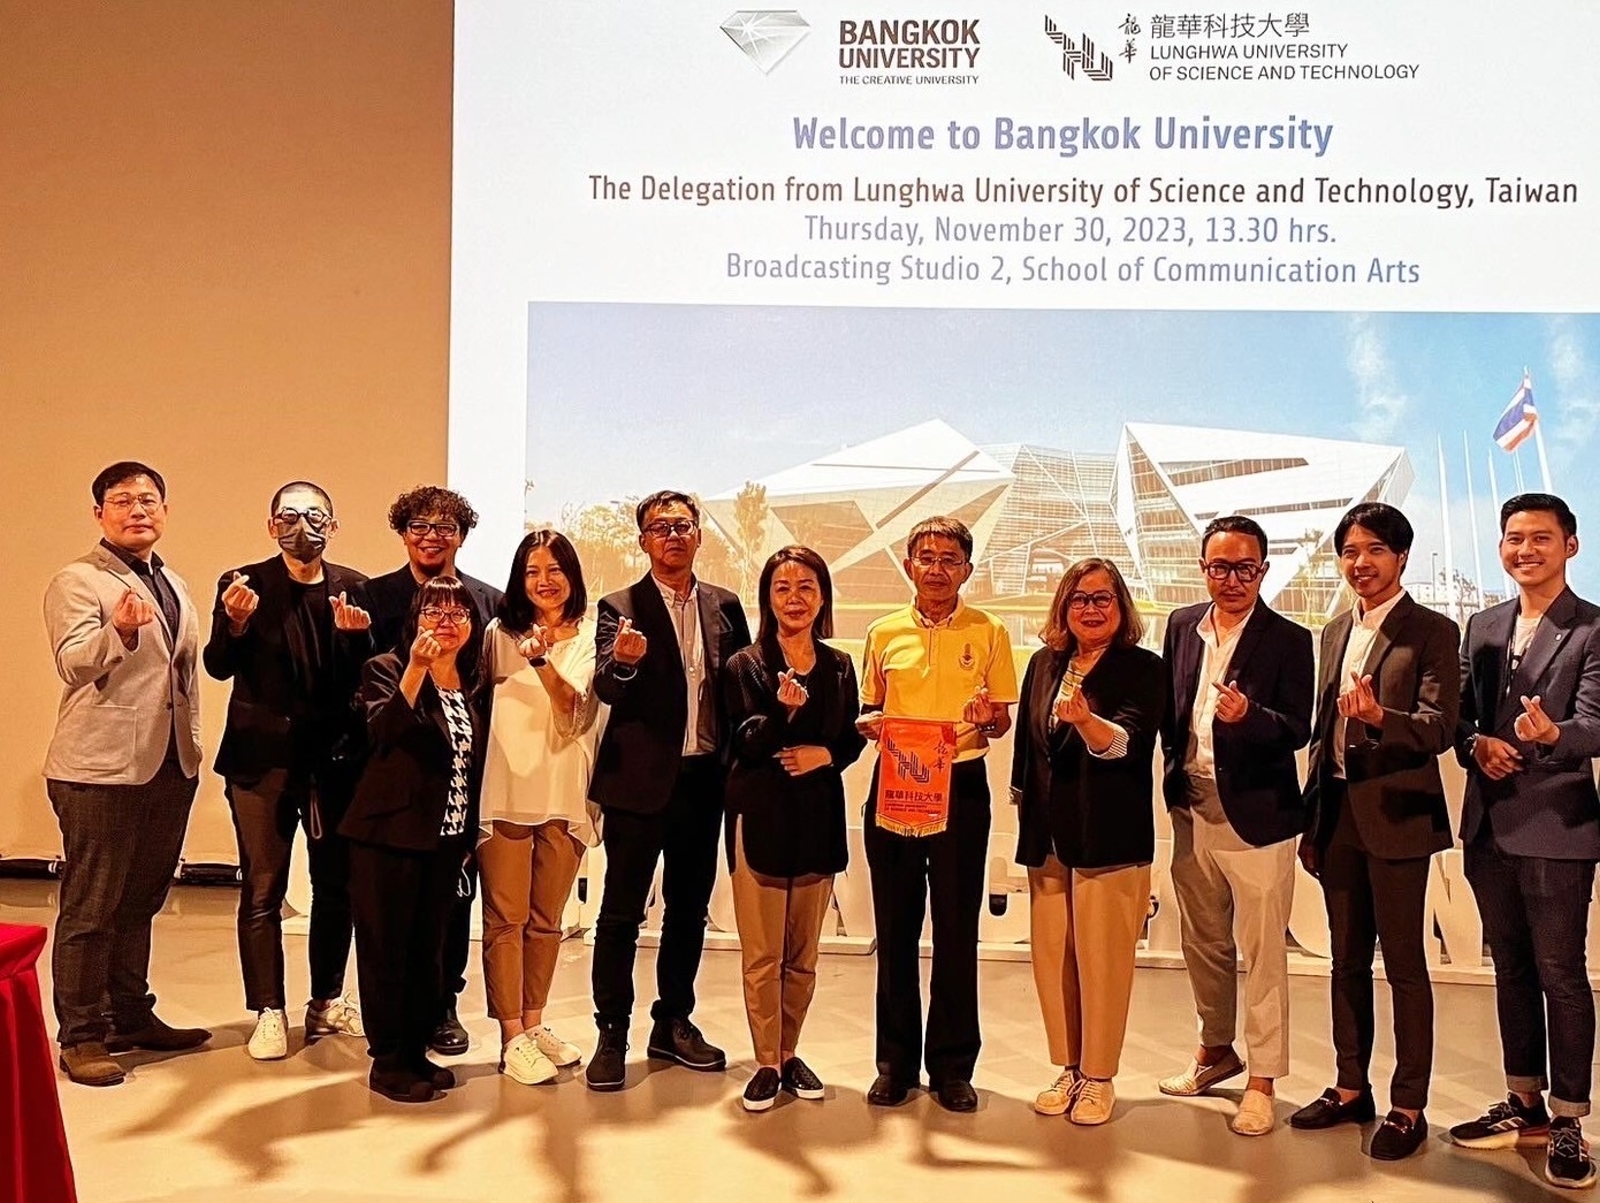 The College of Humanities and Design at Lunghwa University of Science and Technology collaborates with Communication Arts College at Bangkok University to promote cooperation and exchanges in film and media communication.